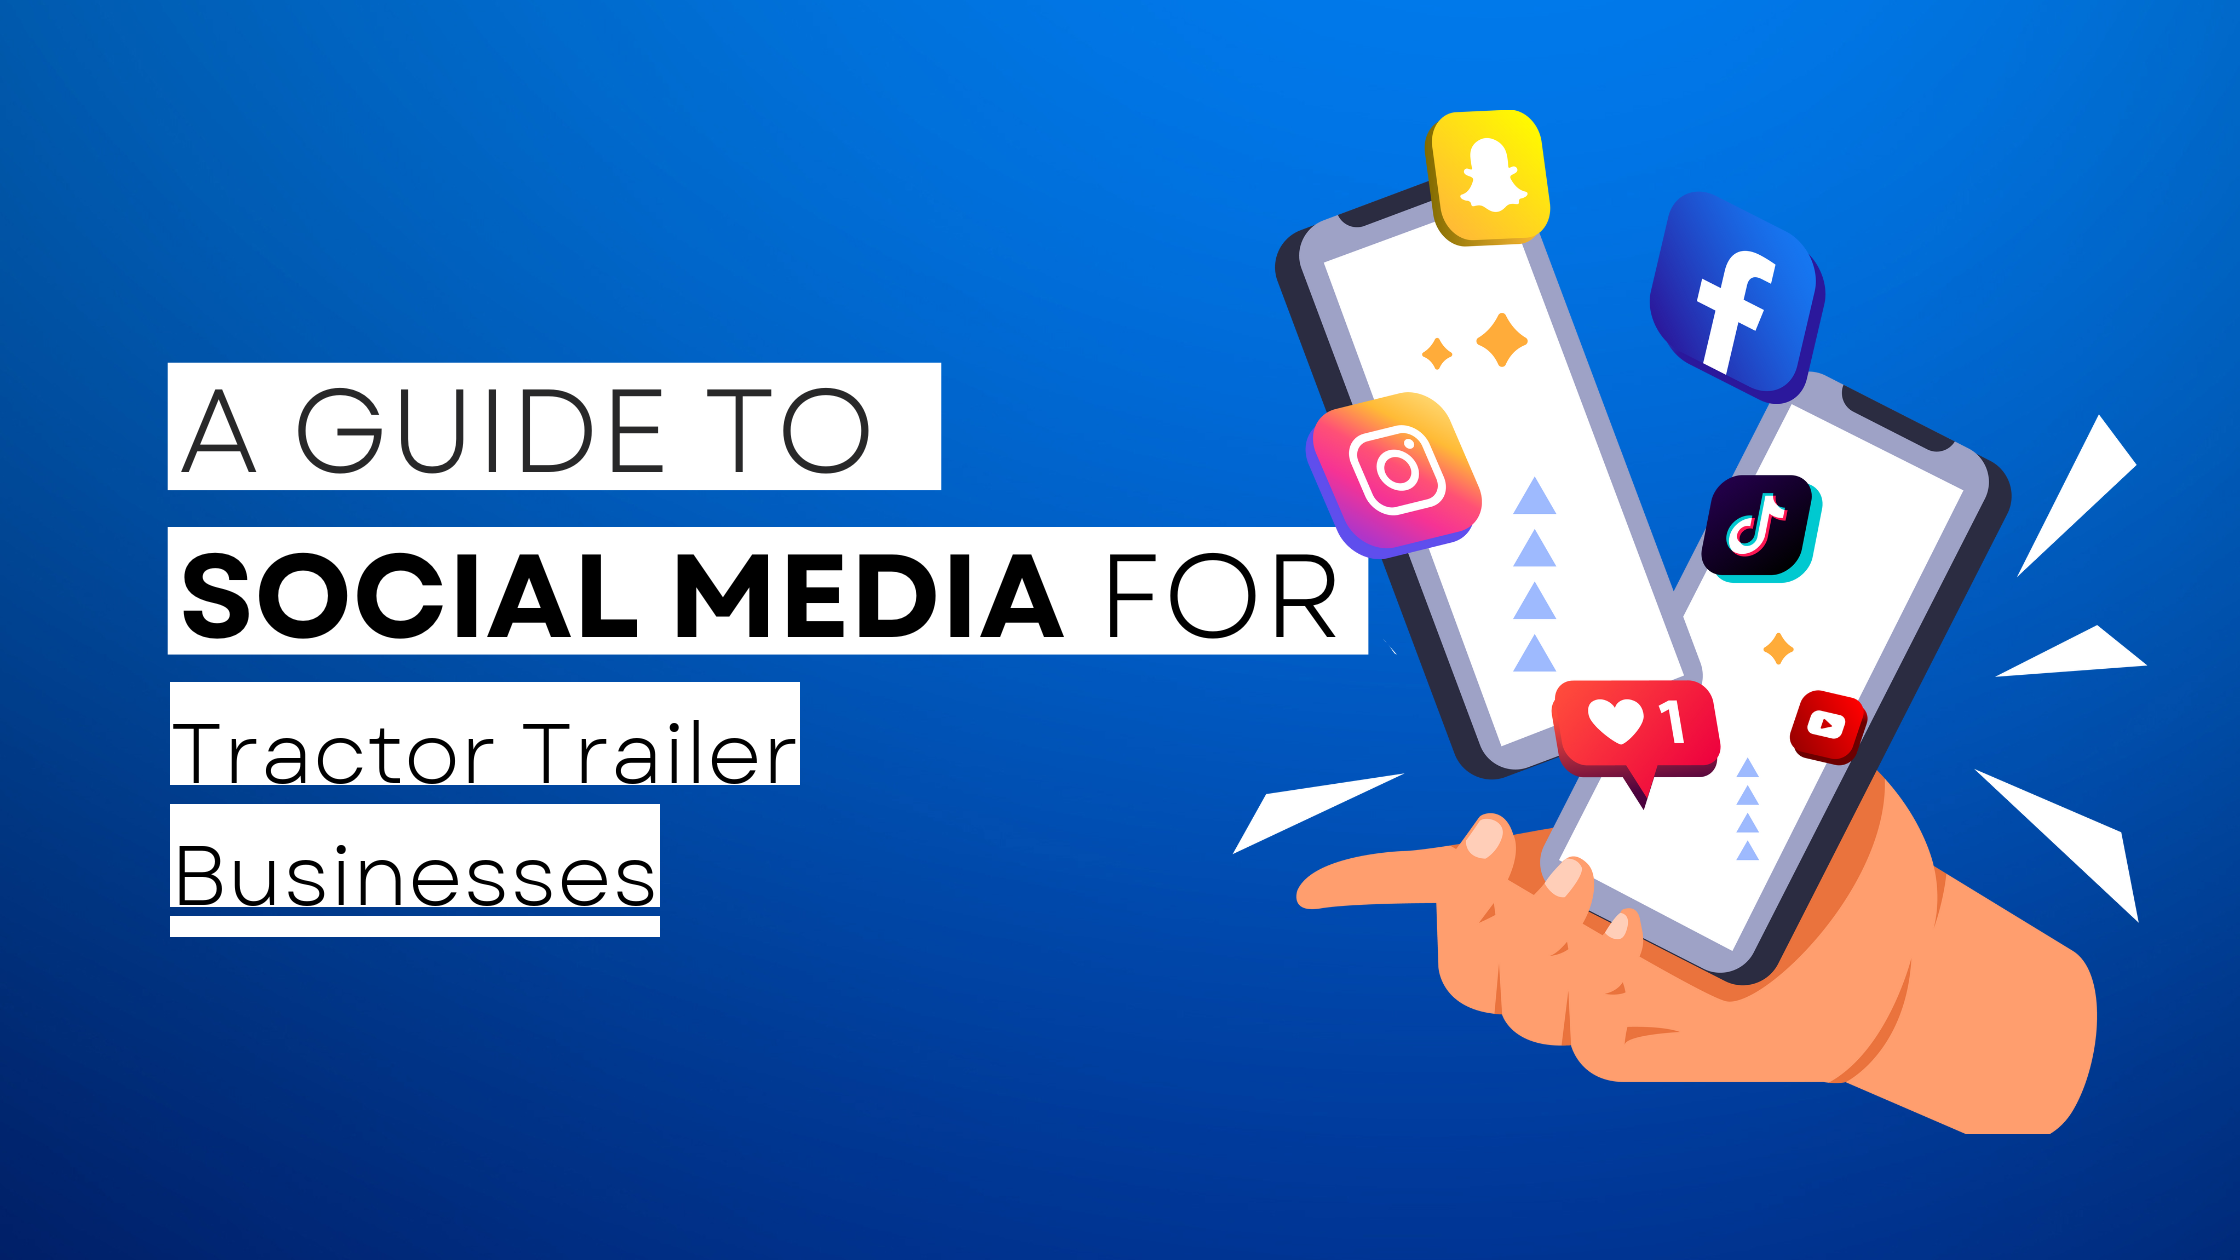 How to start Tractor Trailer  on social media